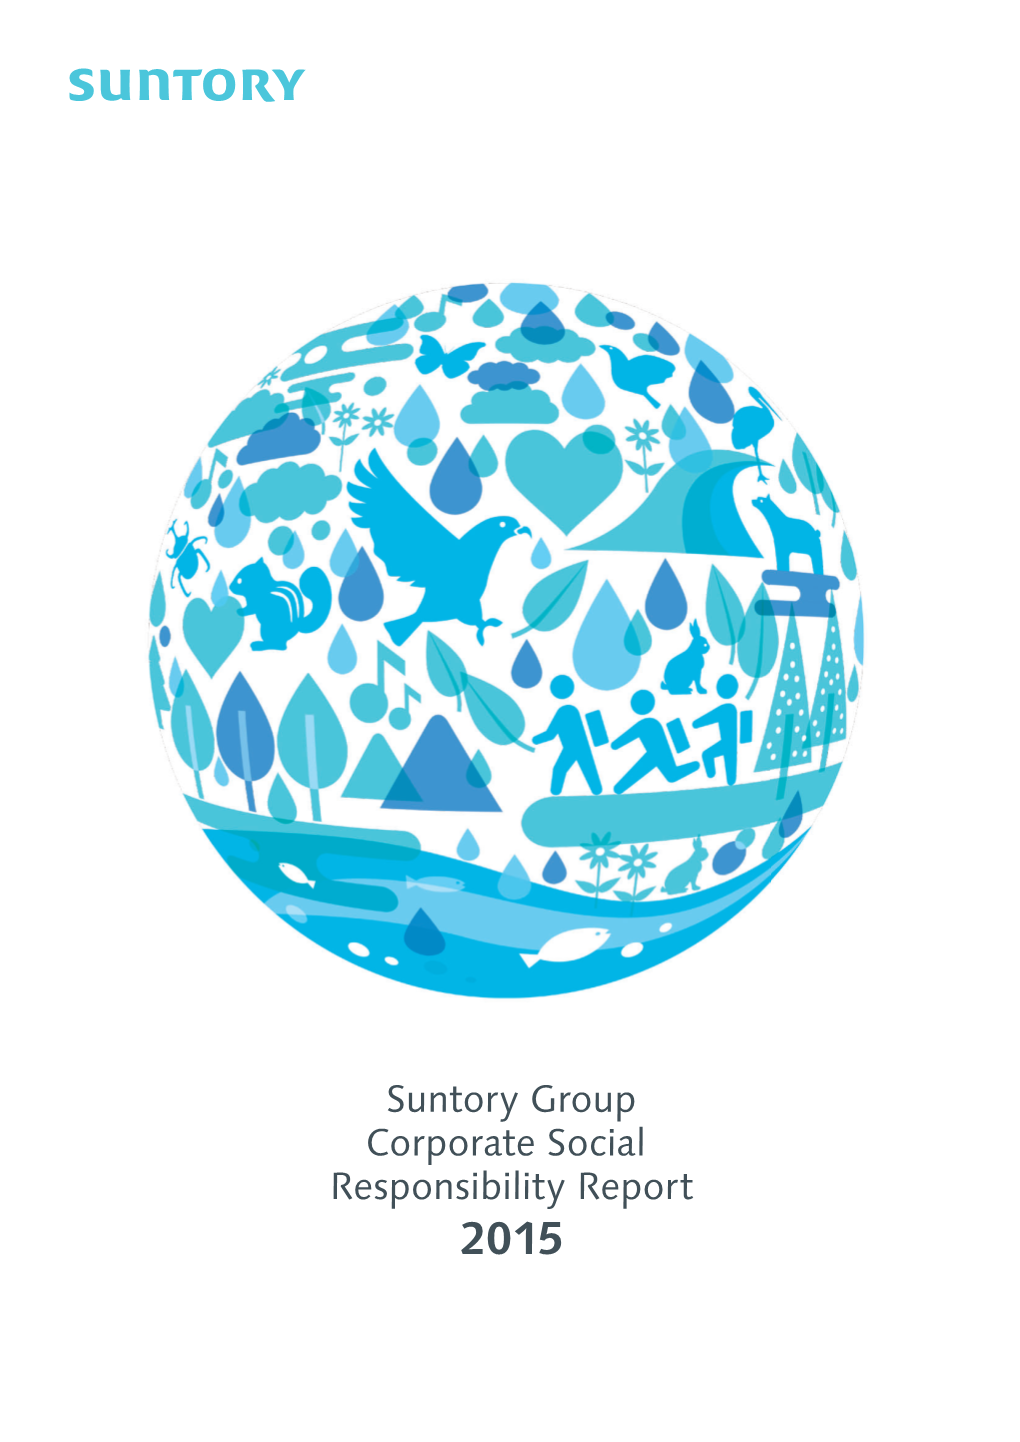 2015 to the Readers of the Suntory Group CSR Report 2015